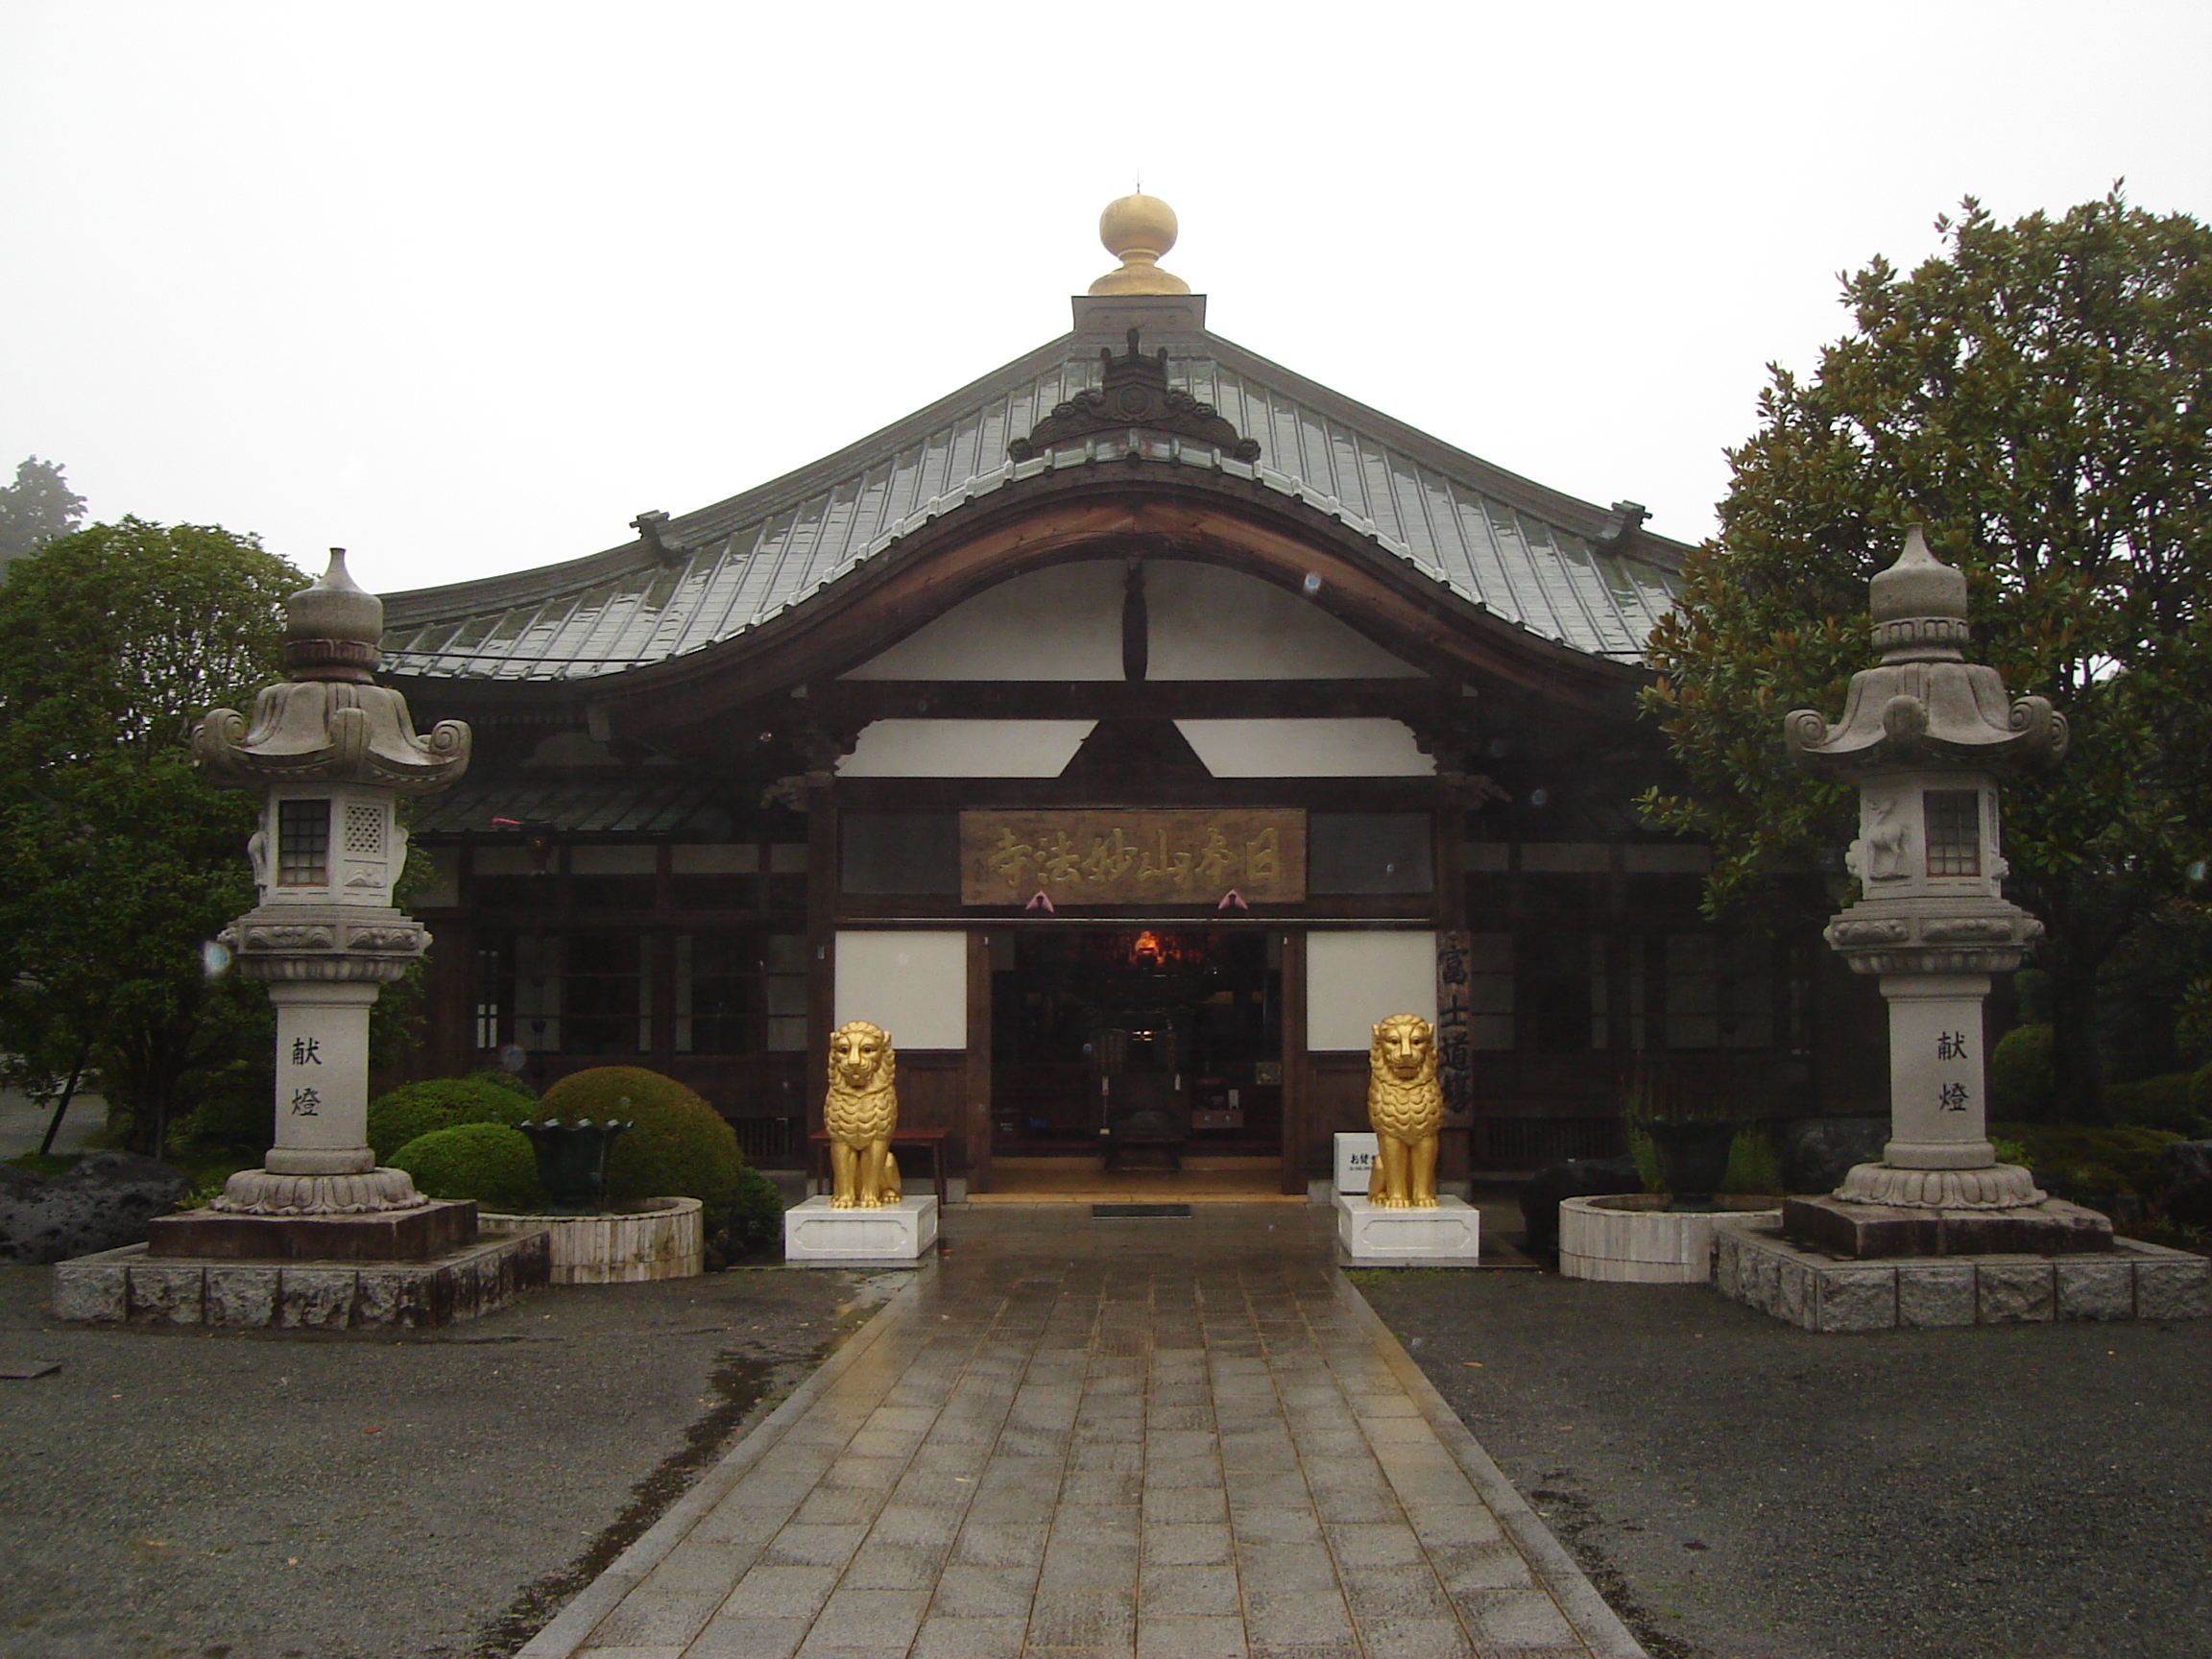 small shrine building with gold lion statues